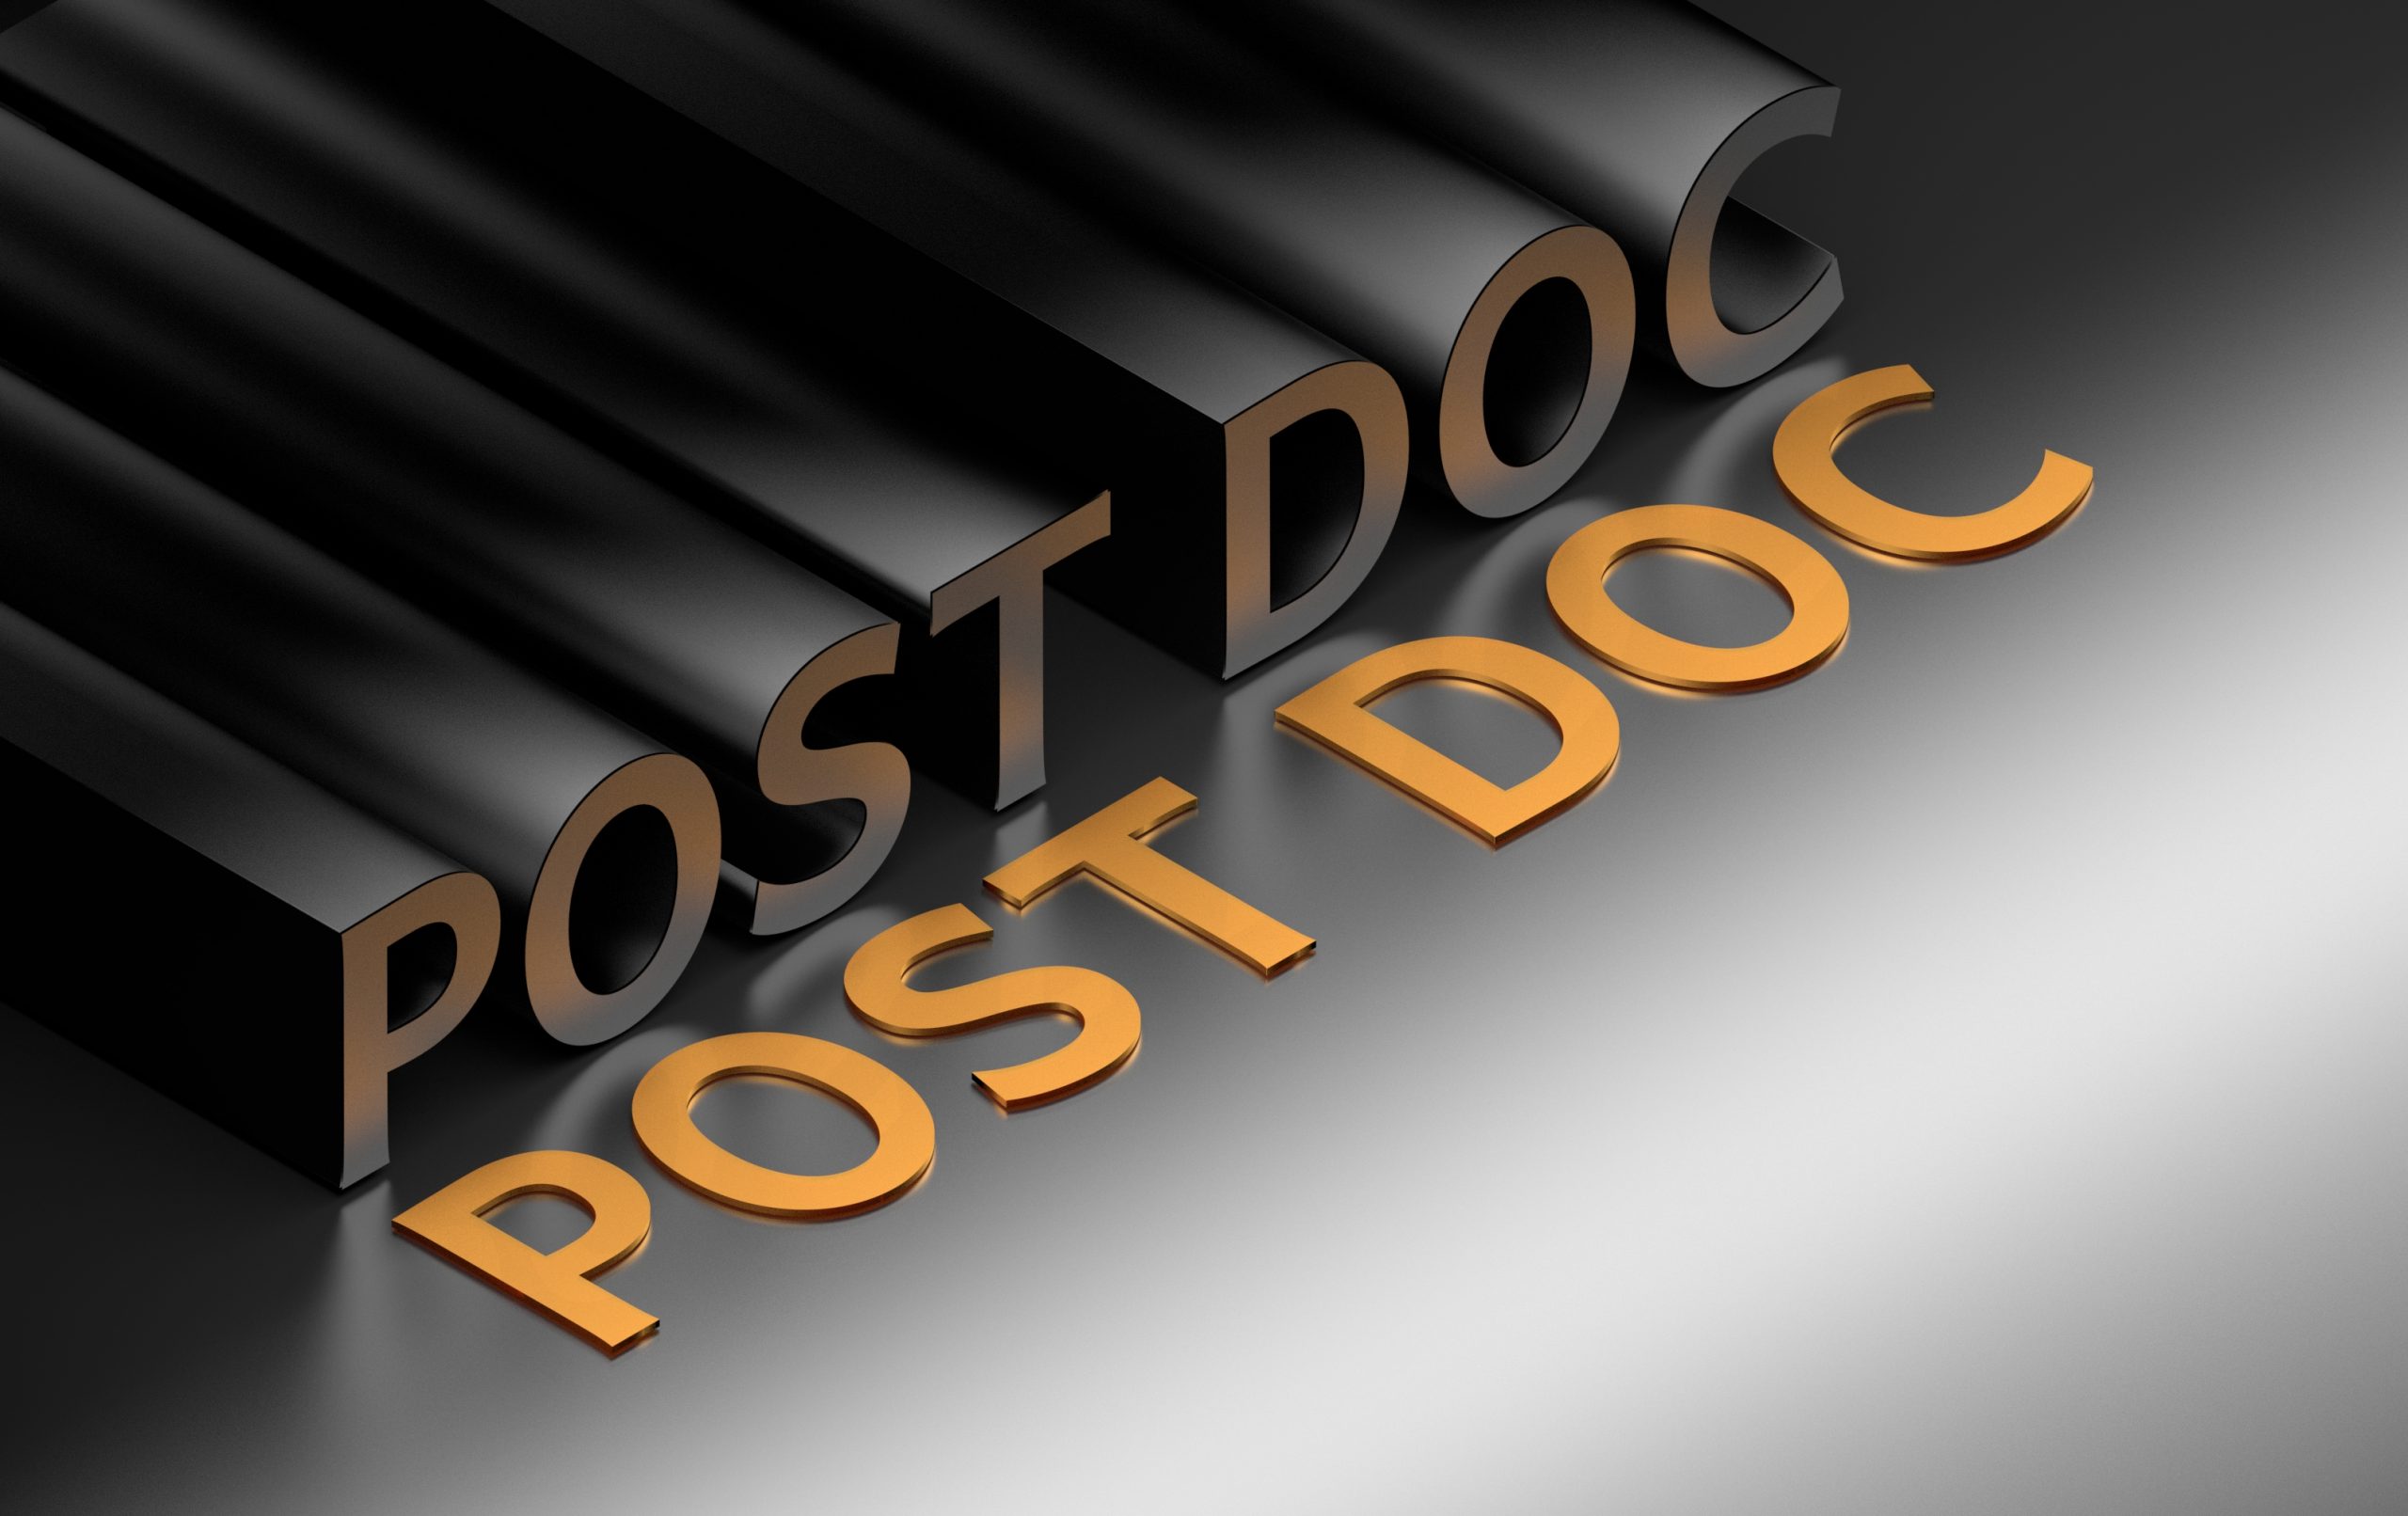 research proposal for postdoc